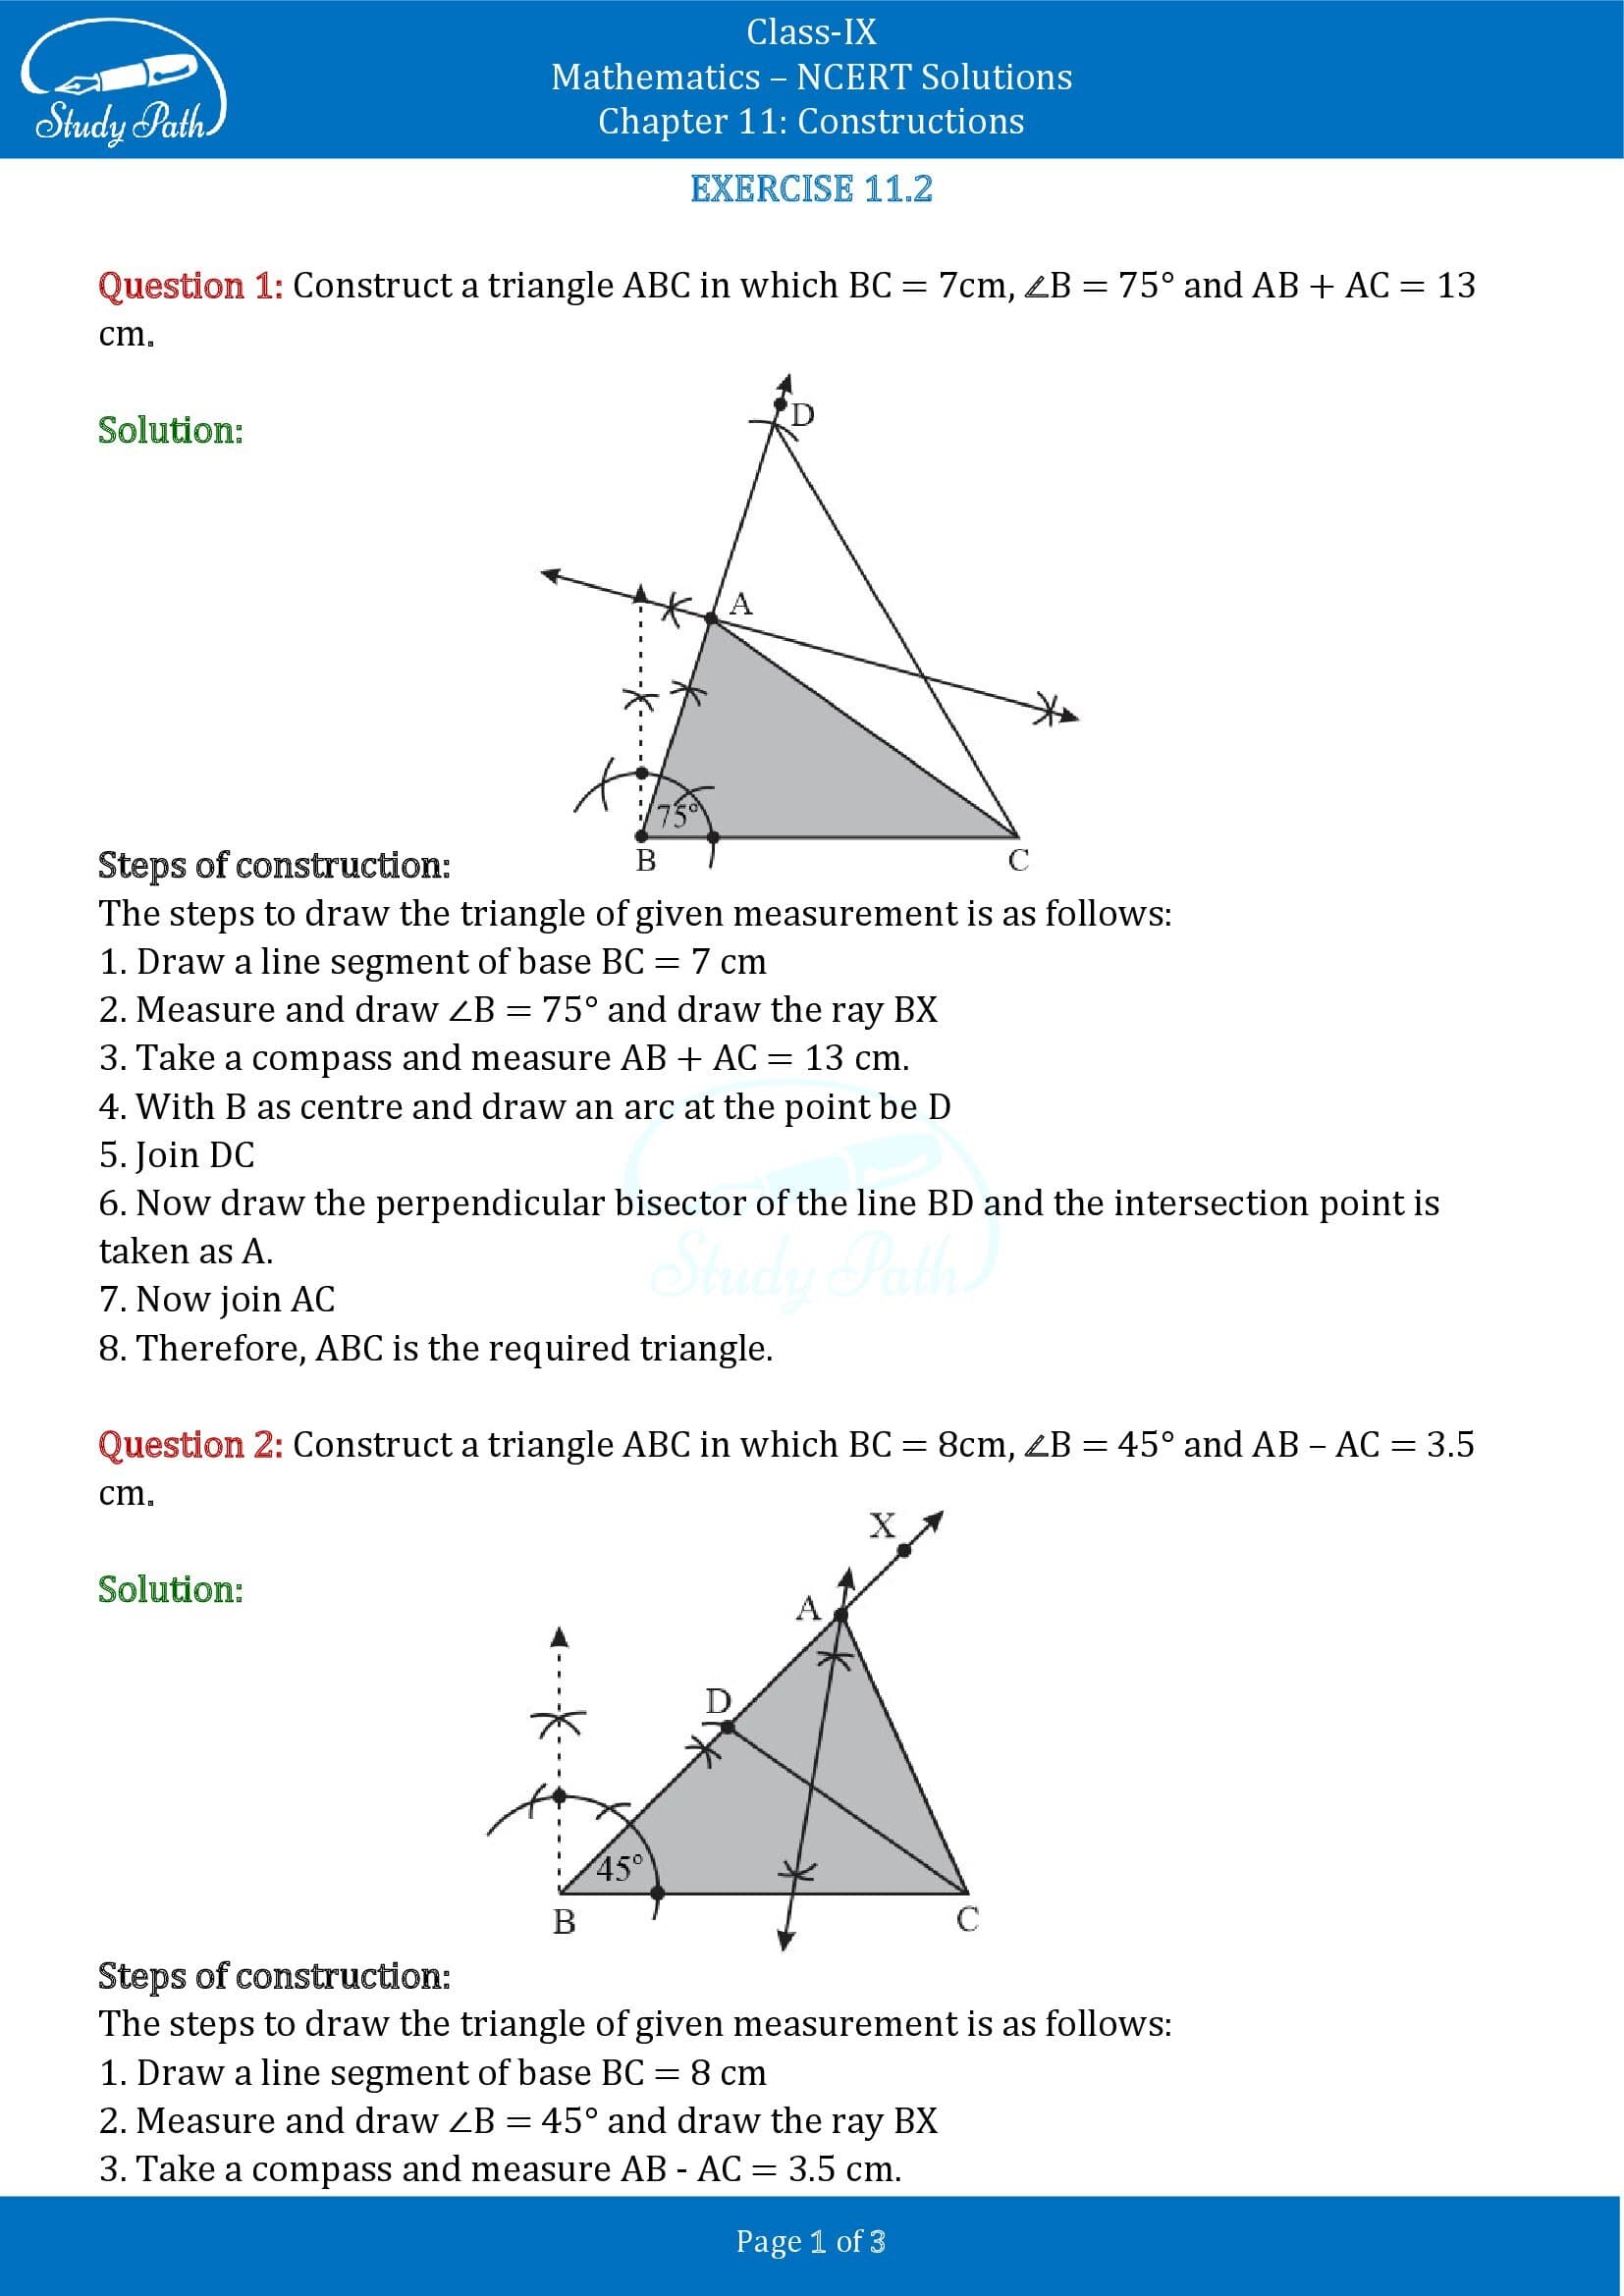 NCERT Solutions for Class 9 Maths Chapter 11 Constructions Exercise 11.2 00001